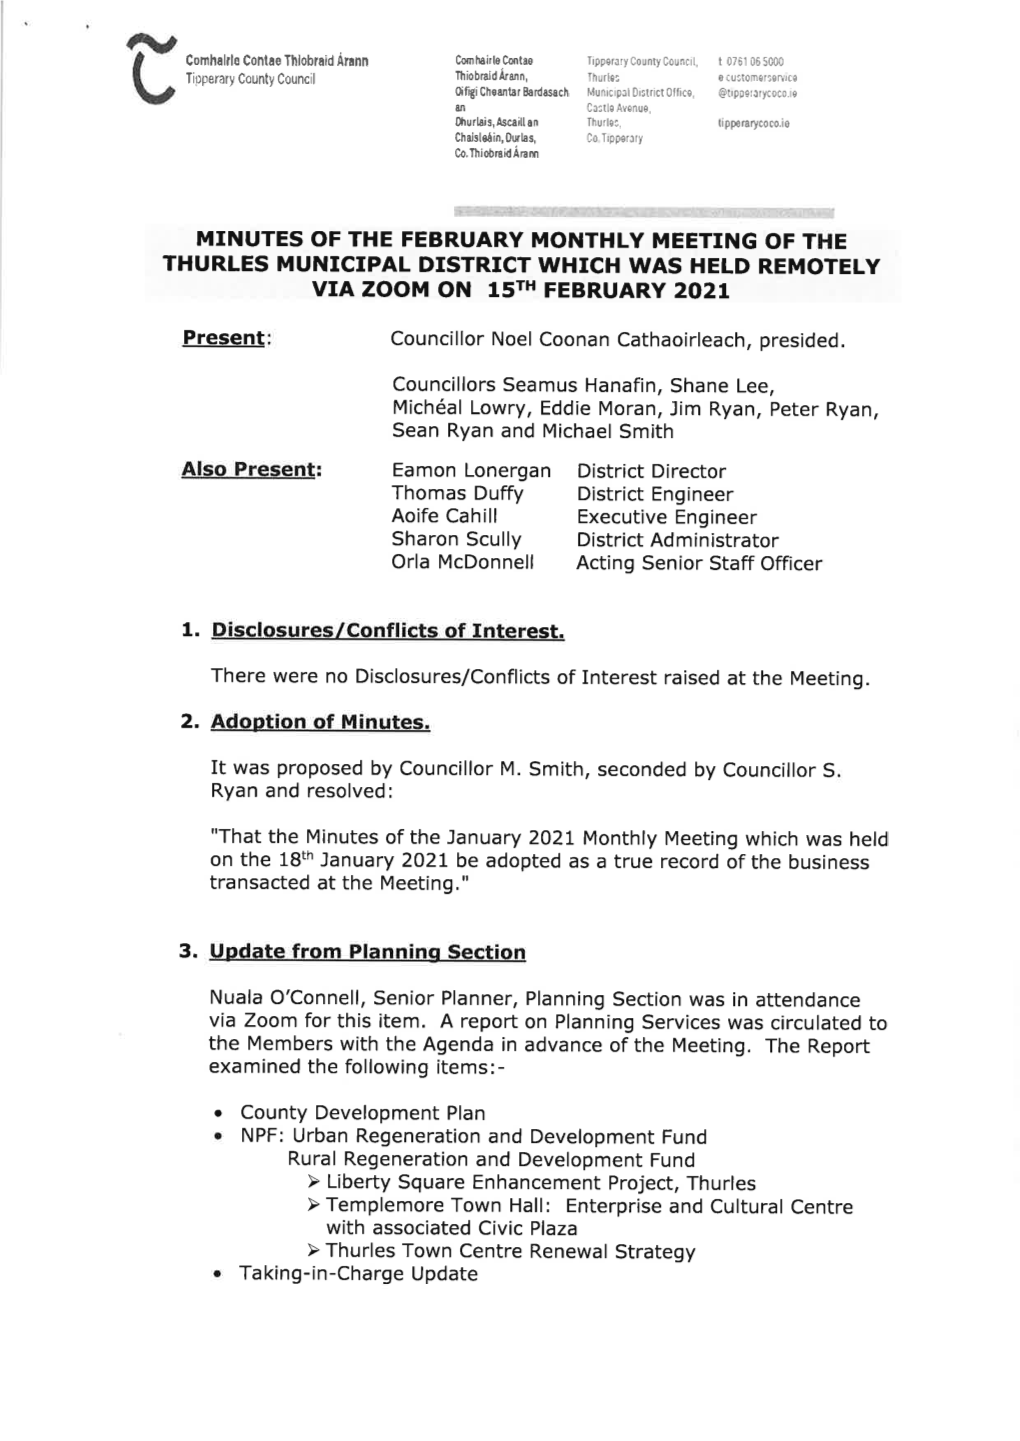 Thurles MD February 2021 Meeting Minutes.Pdf